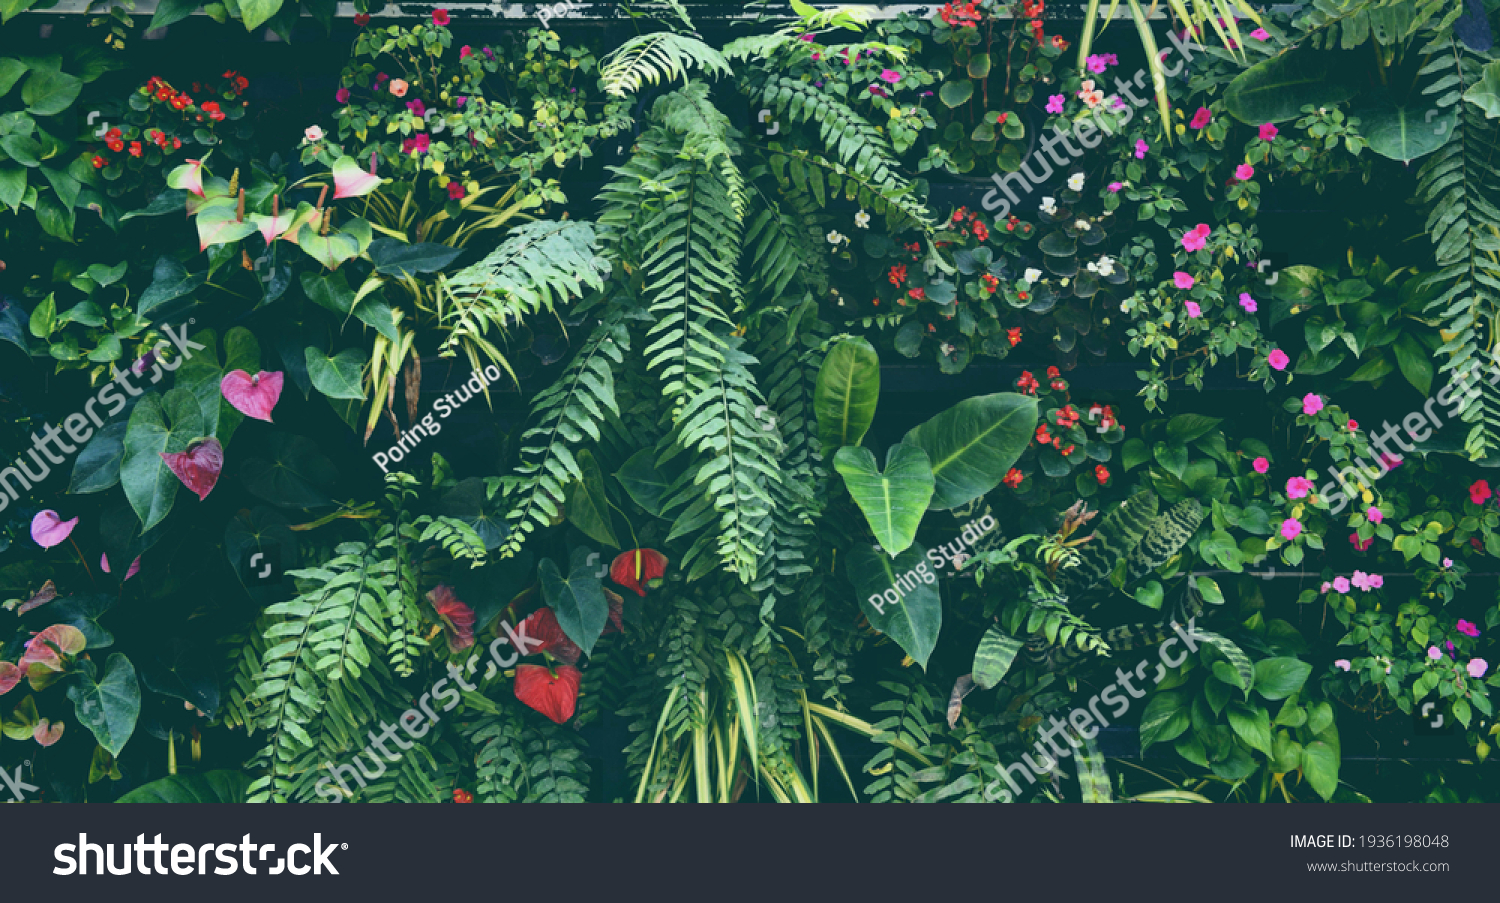 Plant wall with lush green colors, variety plant forest garden on walls orchids various fern leaves jungle palm and flower decorate in the garden rainforest background #1936198048